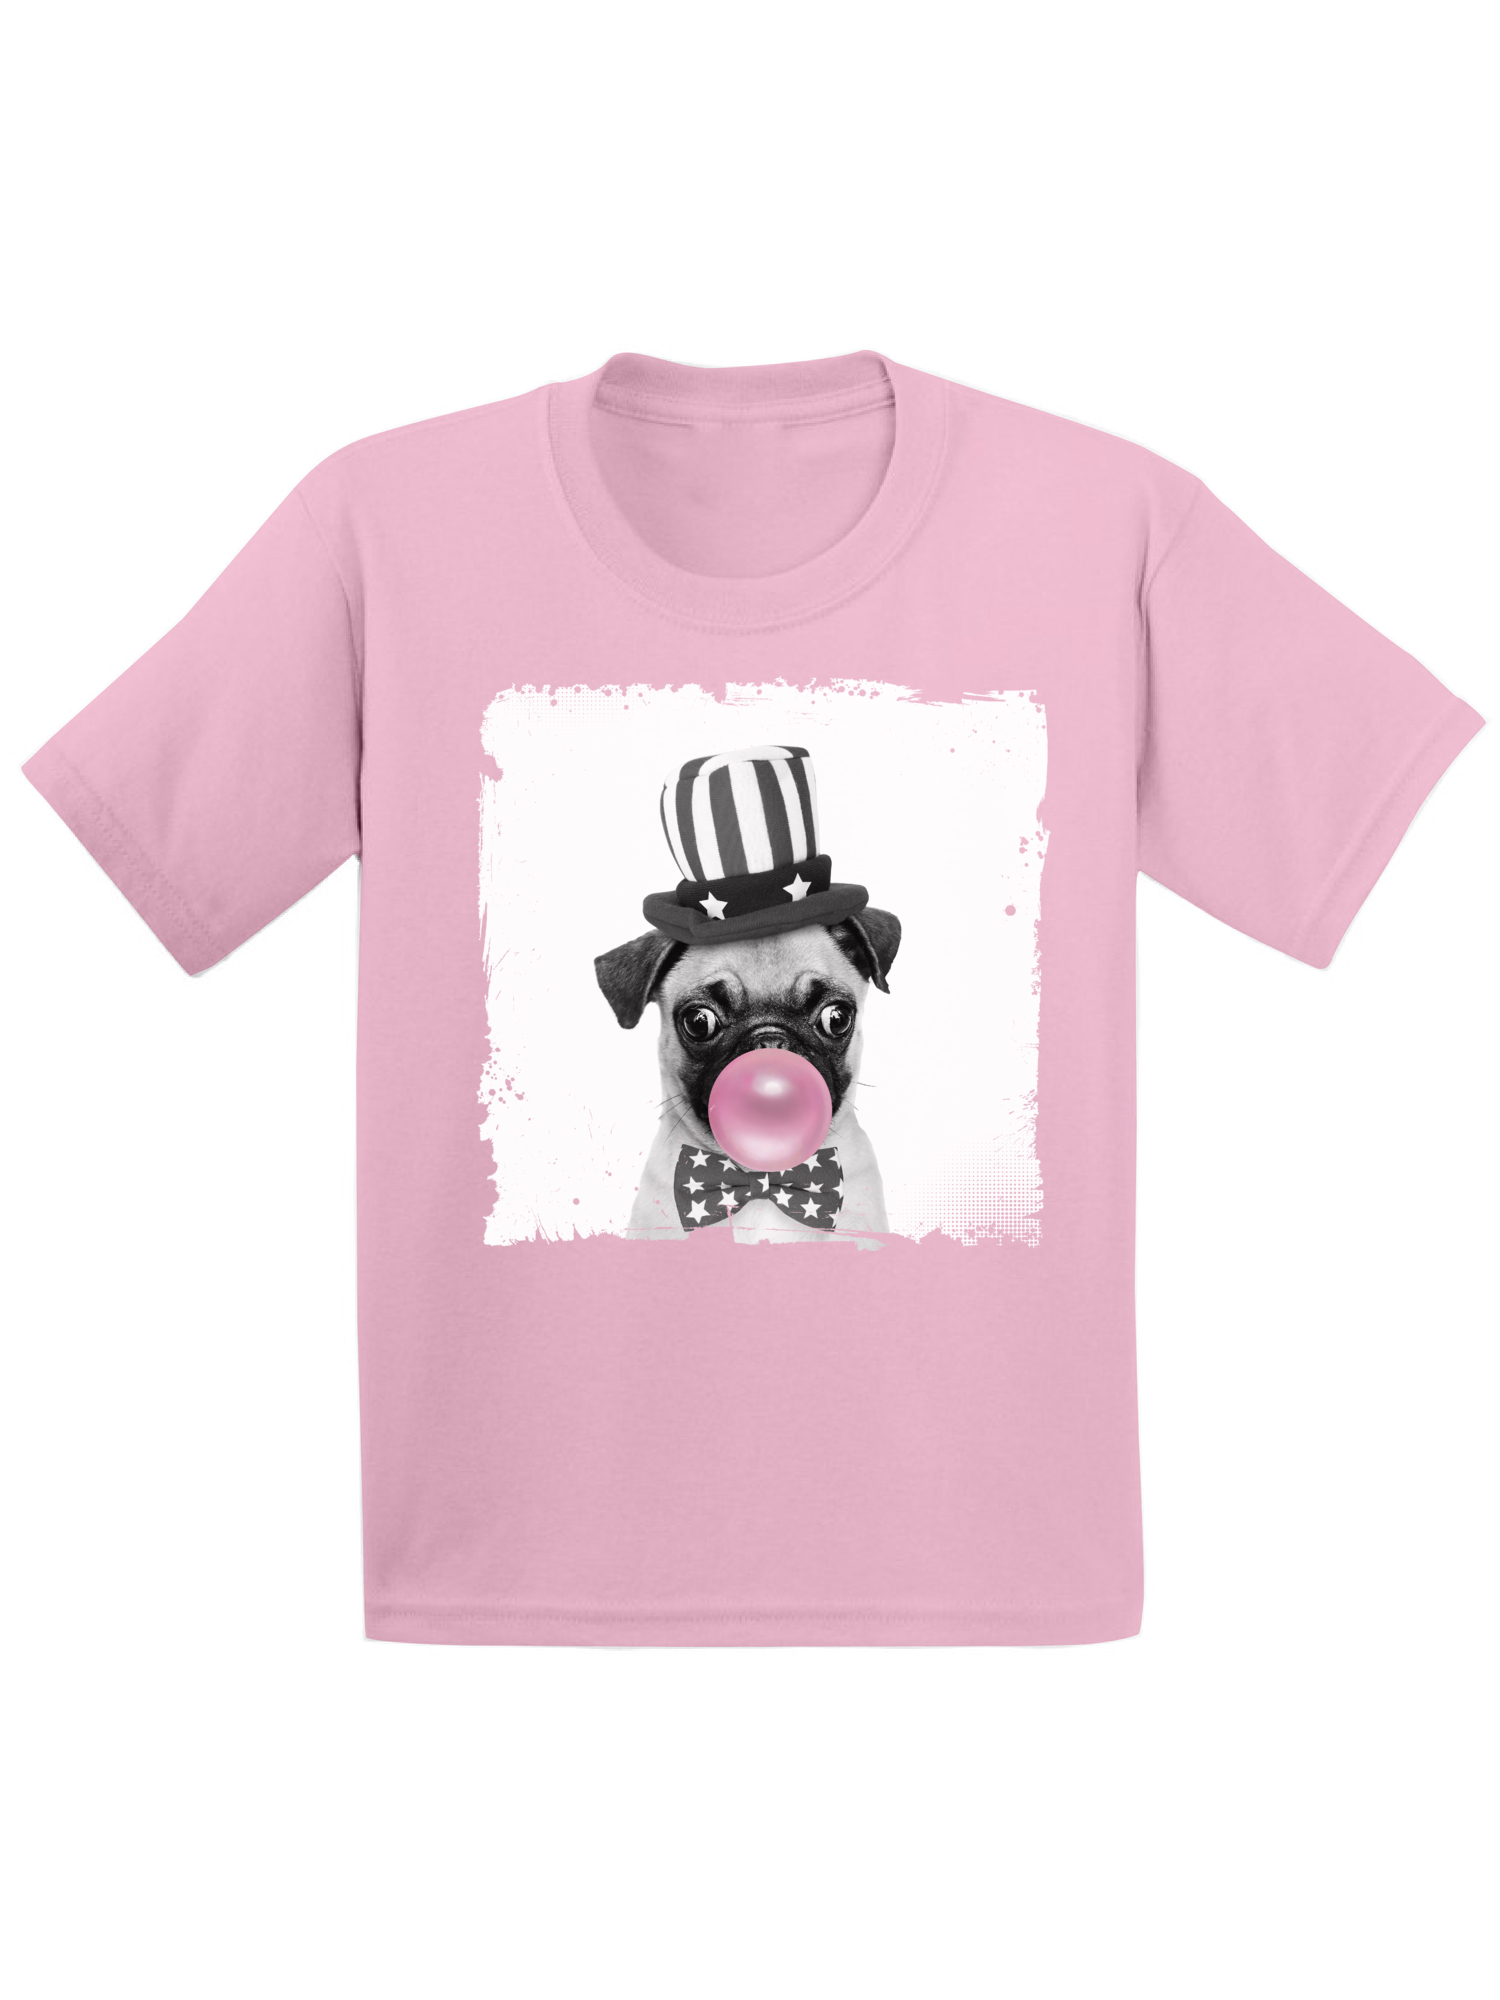 Awkward Styles Cute Pug Infant Tshirt Cute Gifts for Children Pug Clothing Lovely Pug T Shirt Pug Lovers Funny Gifts for Kids Funny Pug Infant Shirt Cute Pug Shirt Animals Prints Kids T Shirt - image 1 of 4